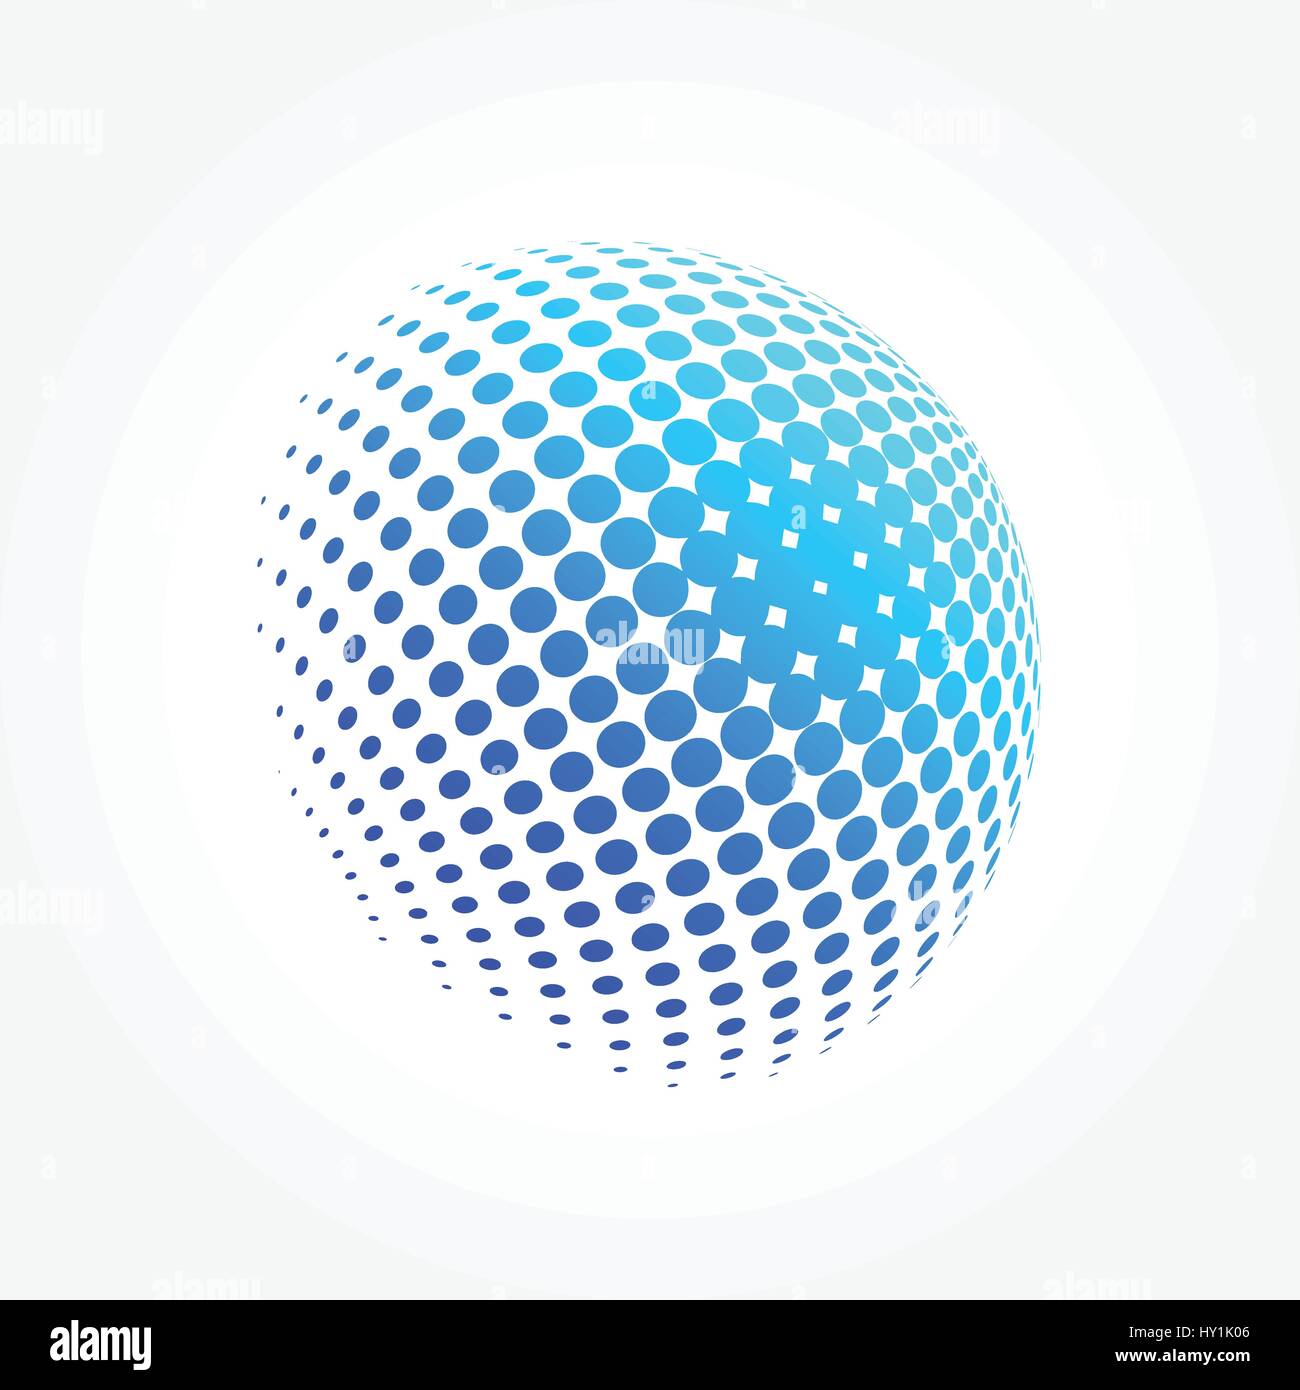 Stylized Globe with Dots Pixels Stock Vector